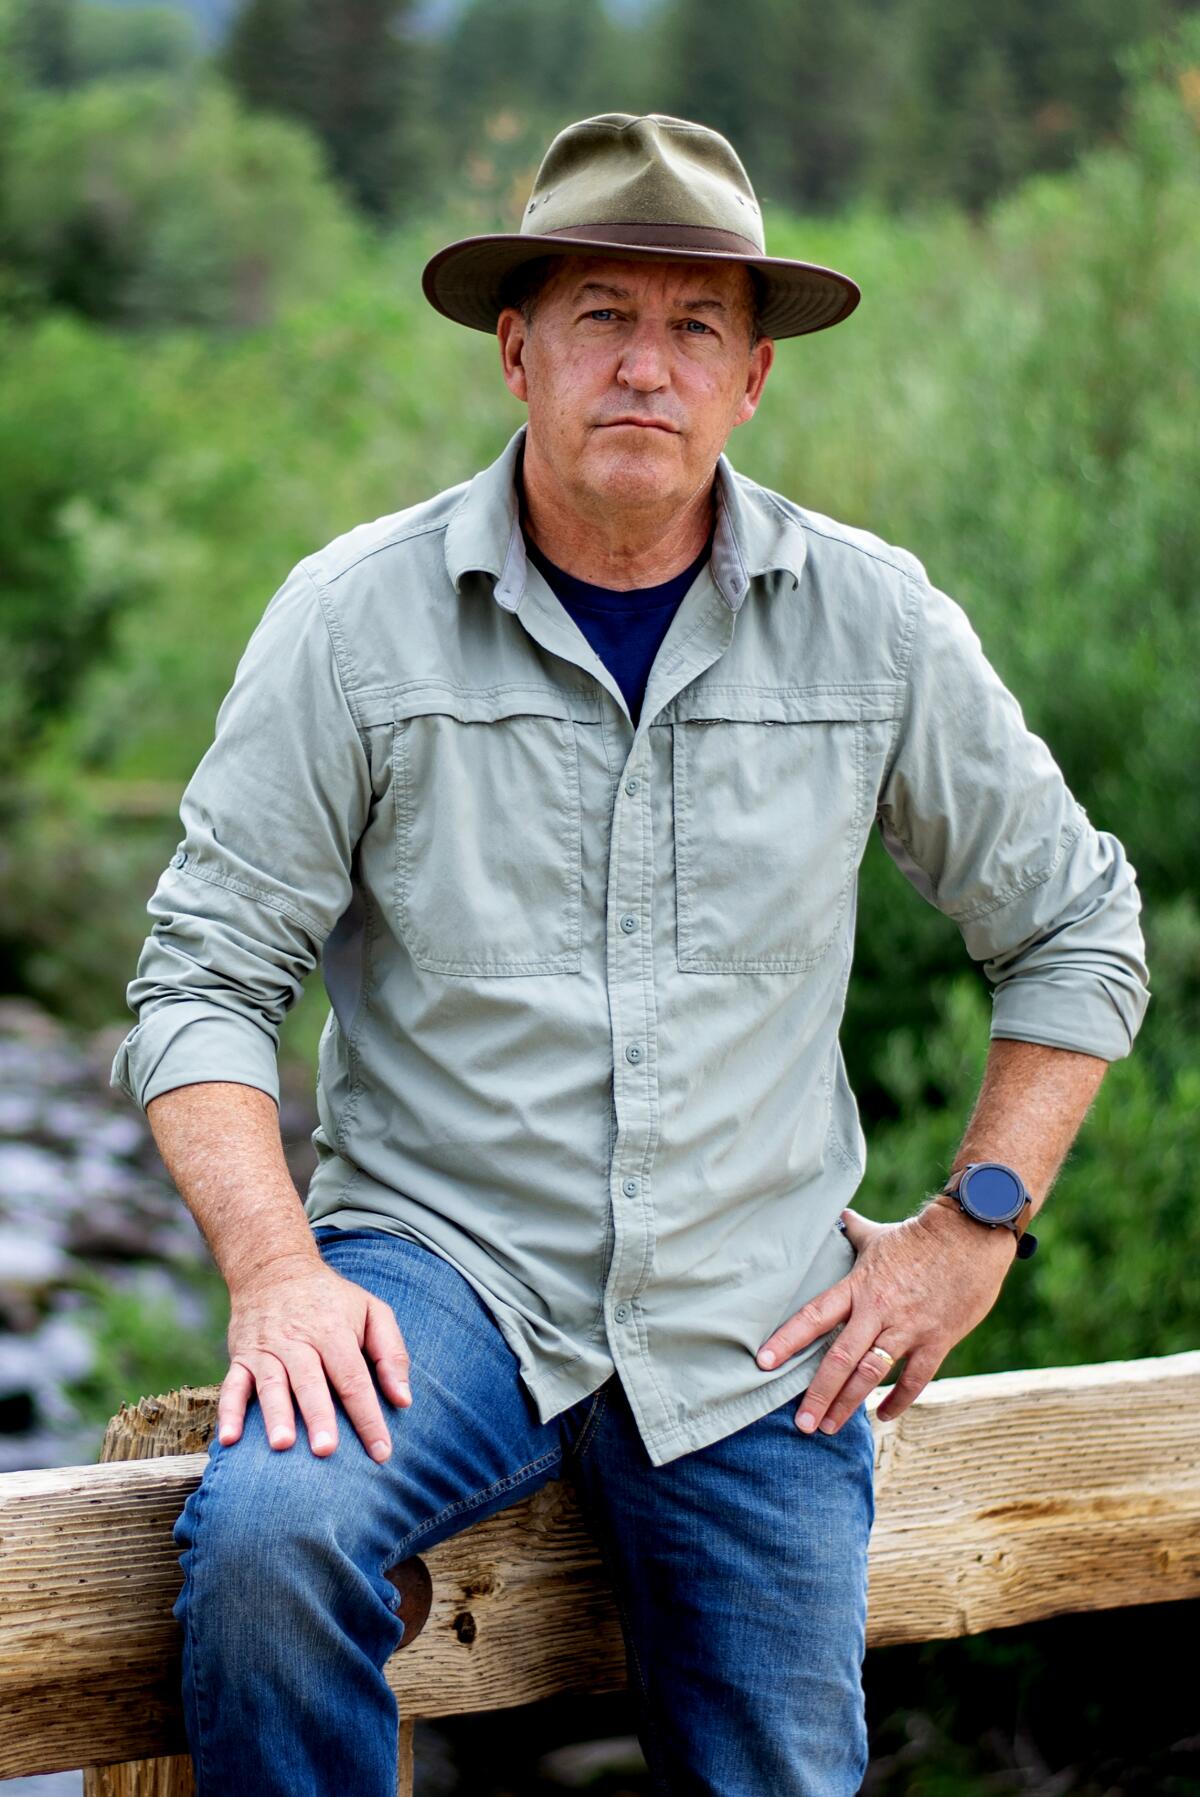 A man wearing jeans and a hat poses against a fence, with shrubbery in the background.